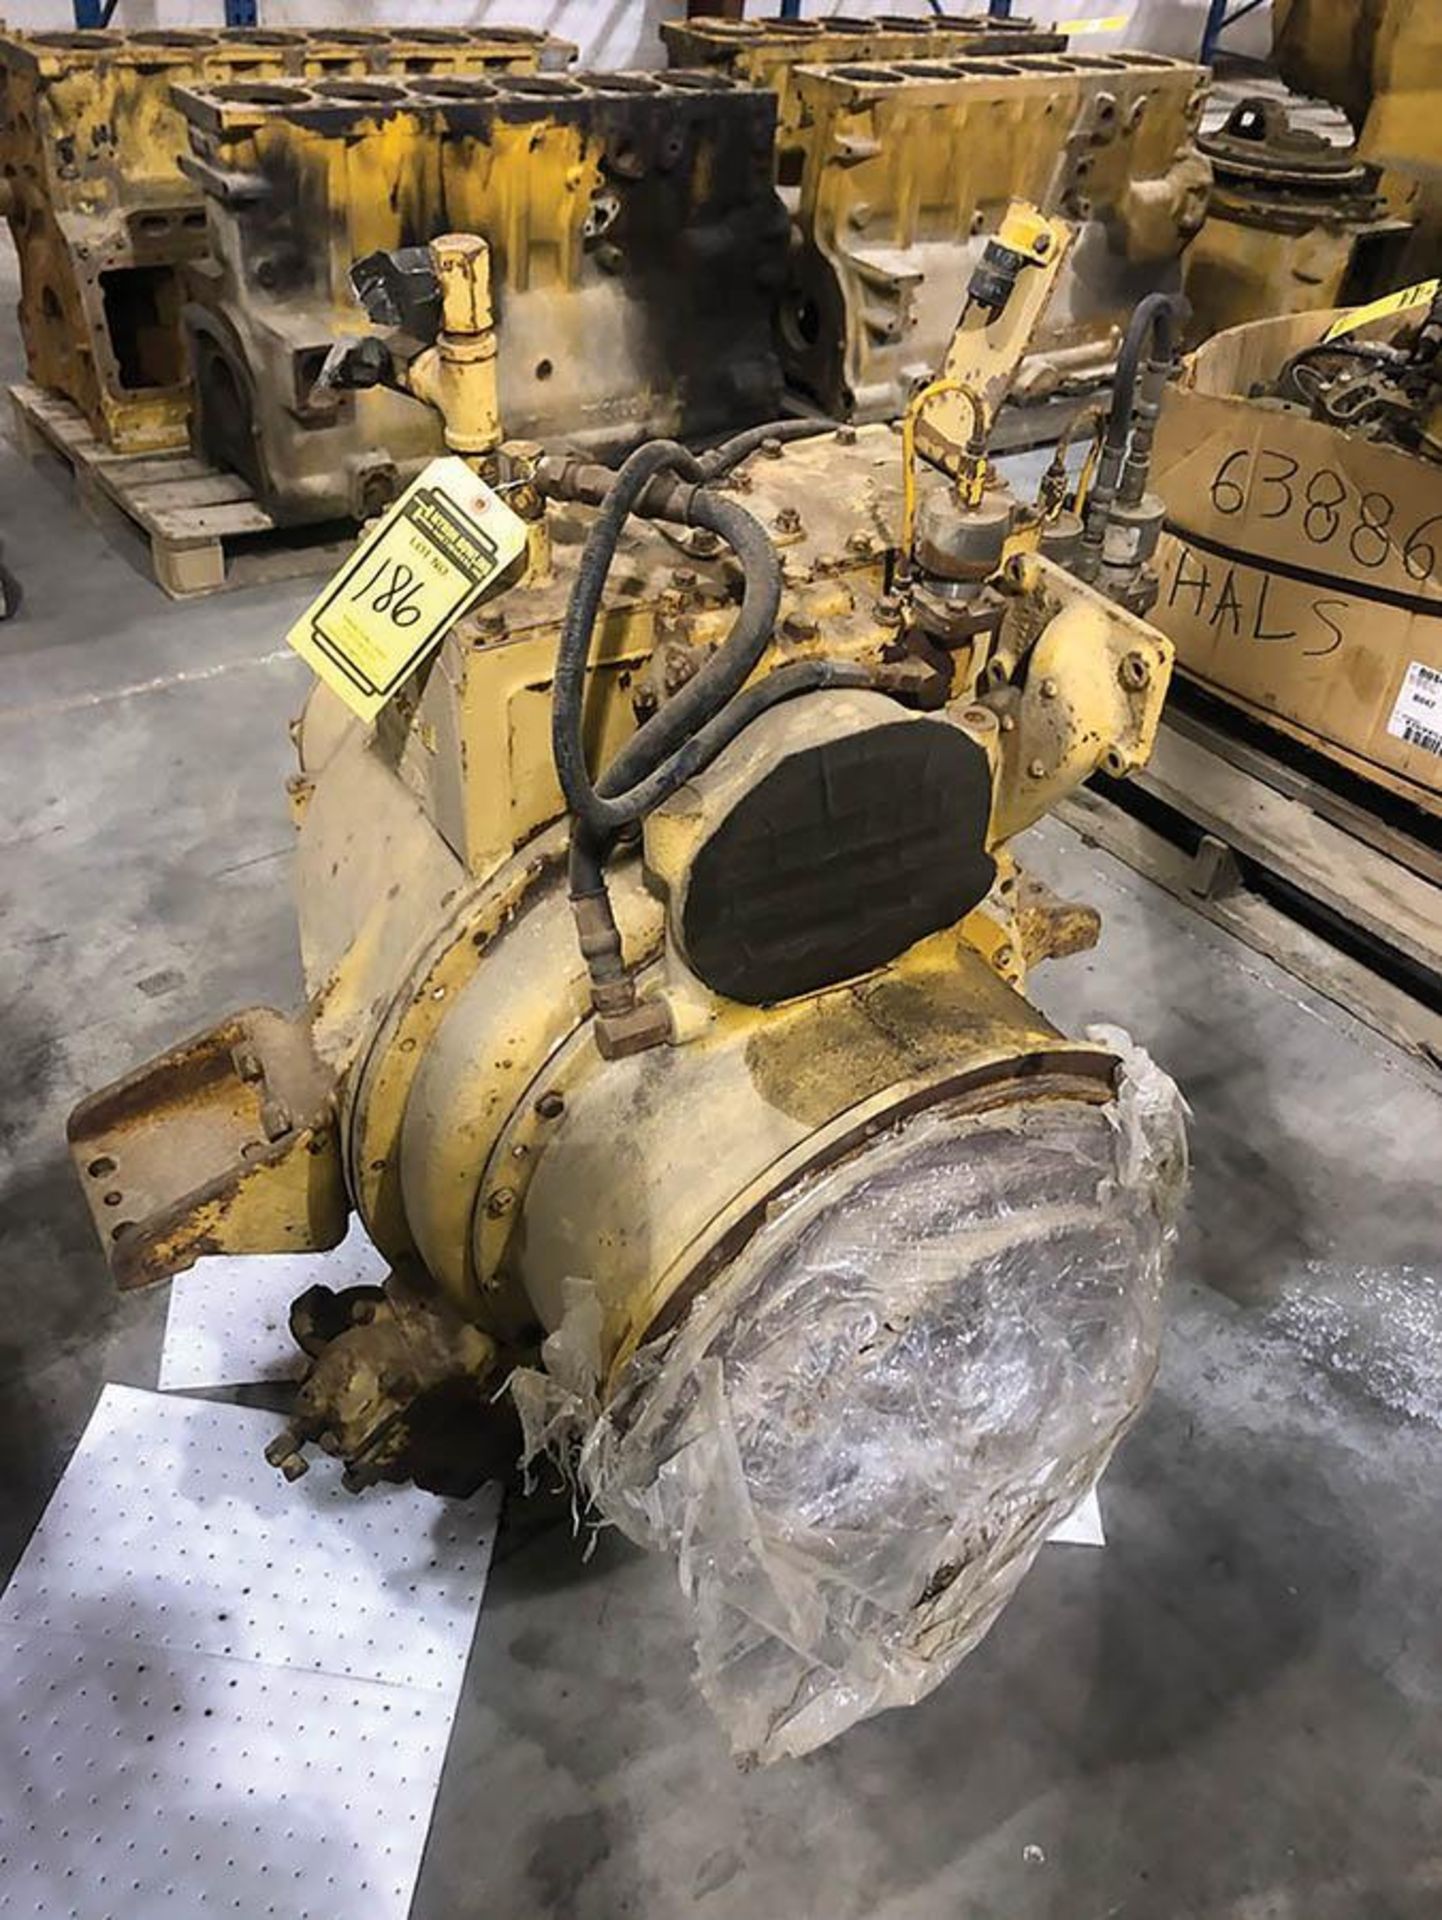 CATERPILLAR 627 REAR TRANSMISSION, COMPLETE - Image 3 of 3